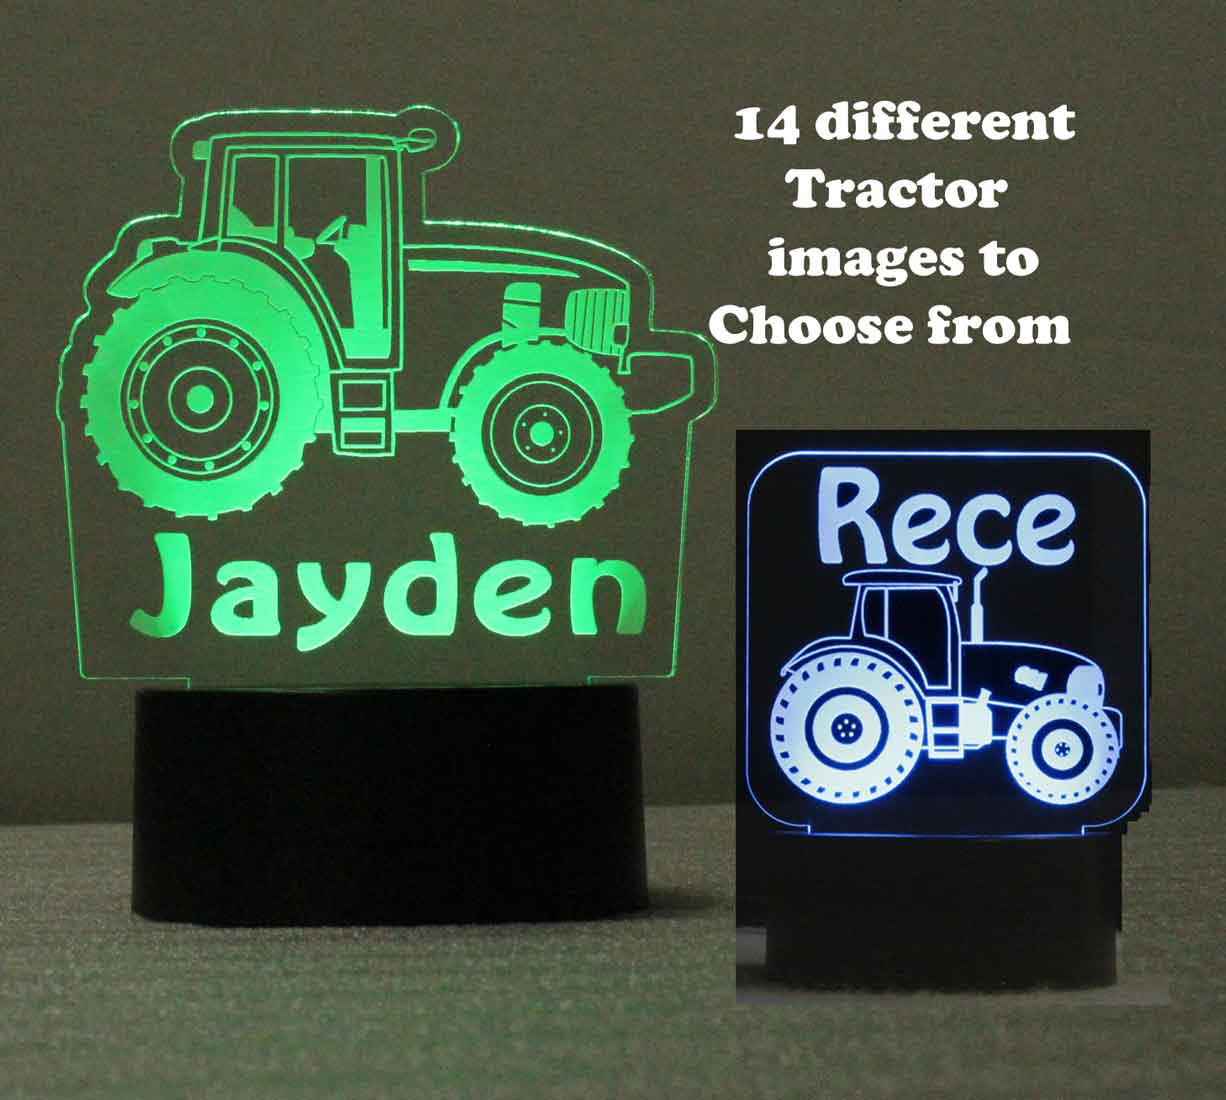 Customizable Personalized Tractor night light LED, USB/110V/240V battery operated